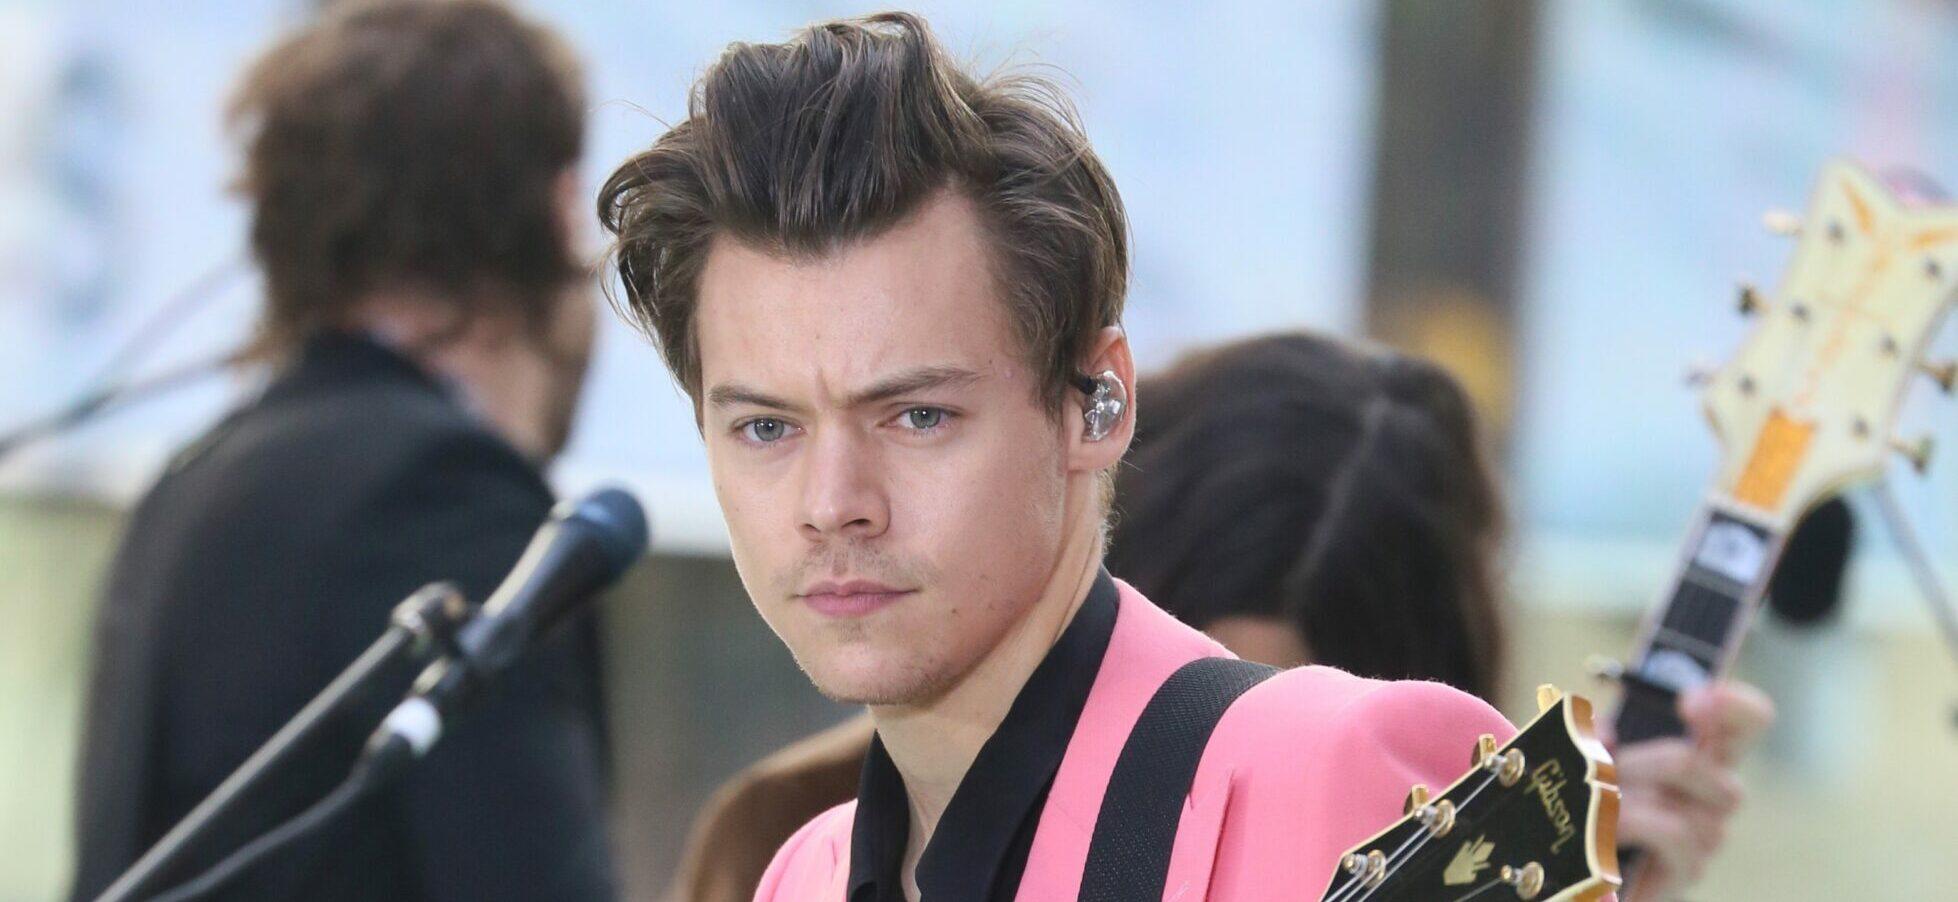 Michael Jackson Fans Show Outrage As Harry Styles Gets Called ‘The New King Of Pop’